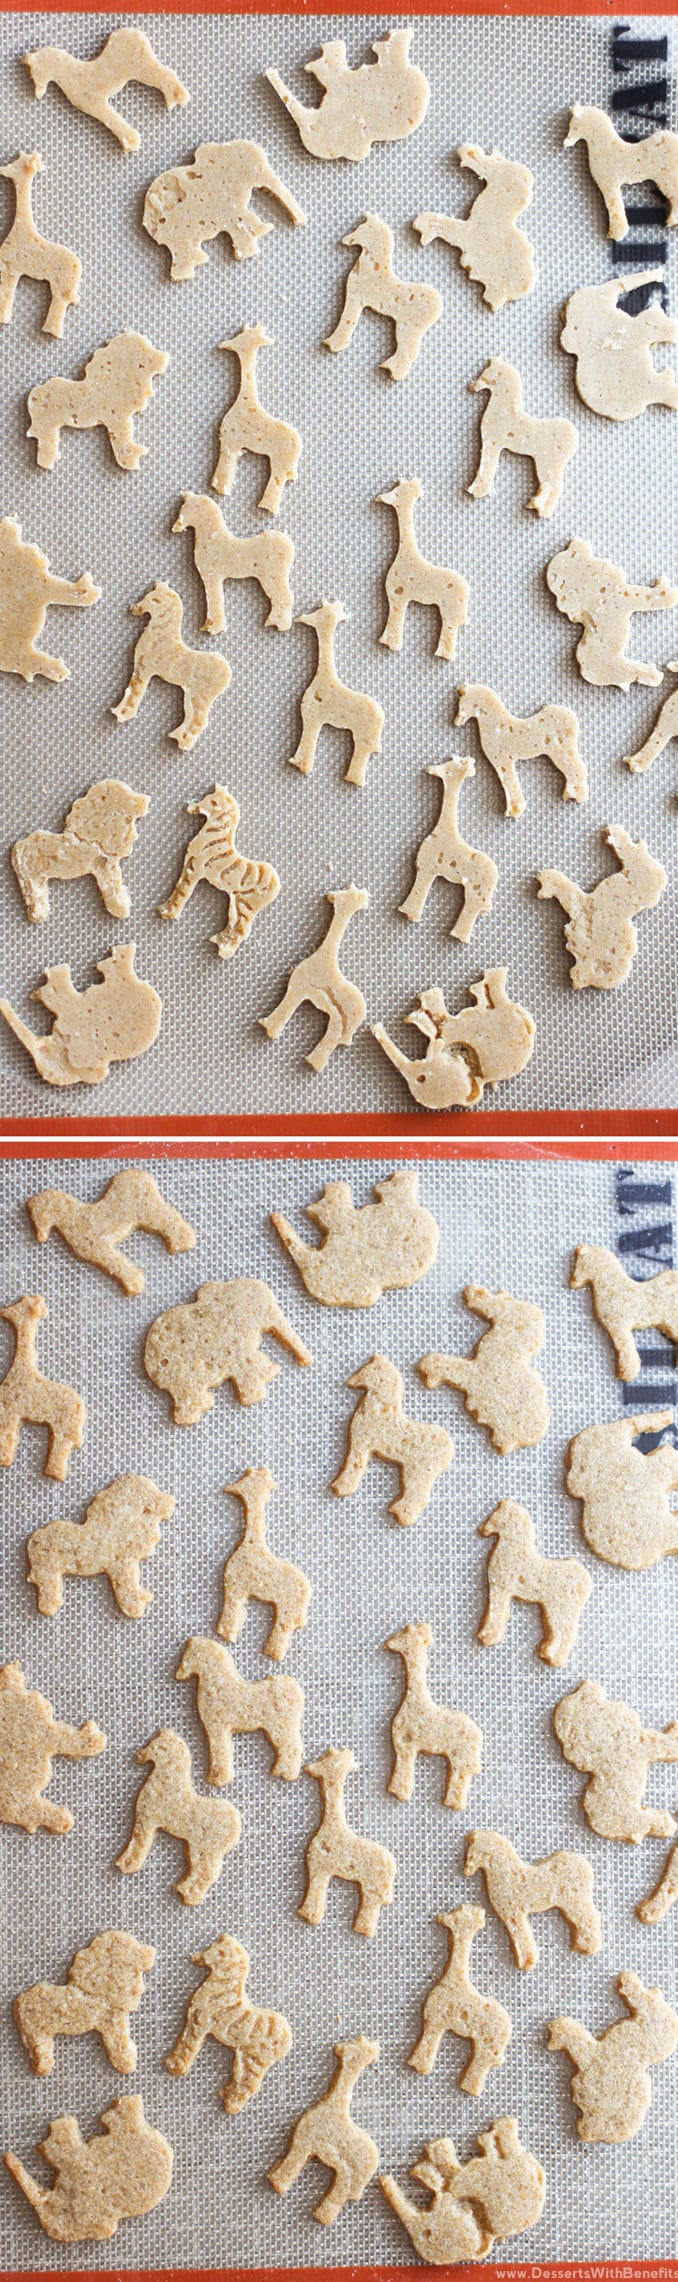 These simple and easy 8-ingredient Healthy Homemade Animal Crackers are the ultimate snack! They’re simple, yet addicting. They’re not overly sweet, yet still totally delicious. You’d never know these DIY animal crackers are whole grain, sugar free, gluten free, dairy free, and vegan! -- Healthy Dessert Recipes at Desserts with Benefits